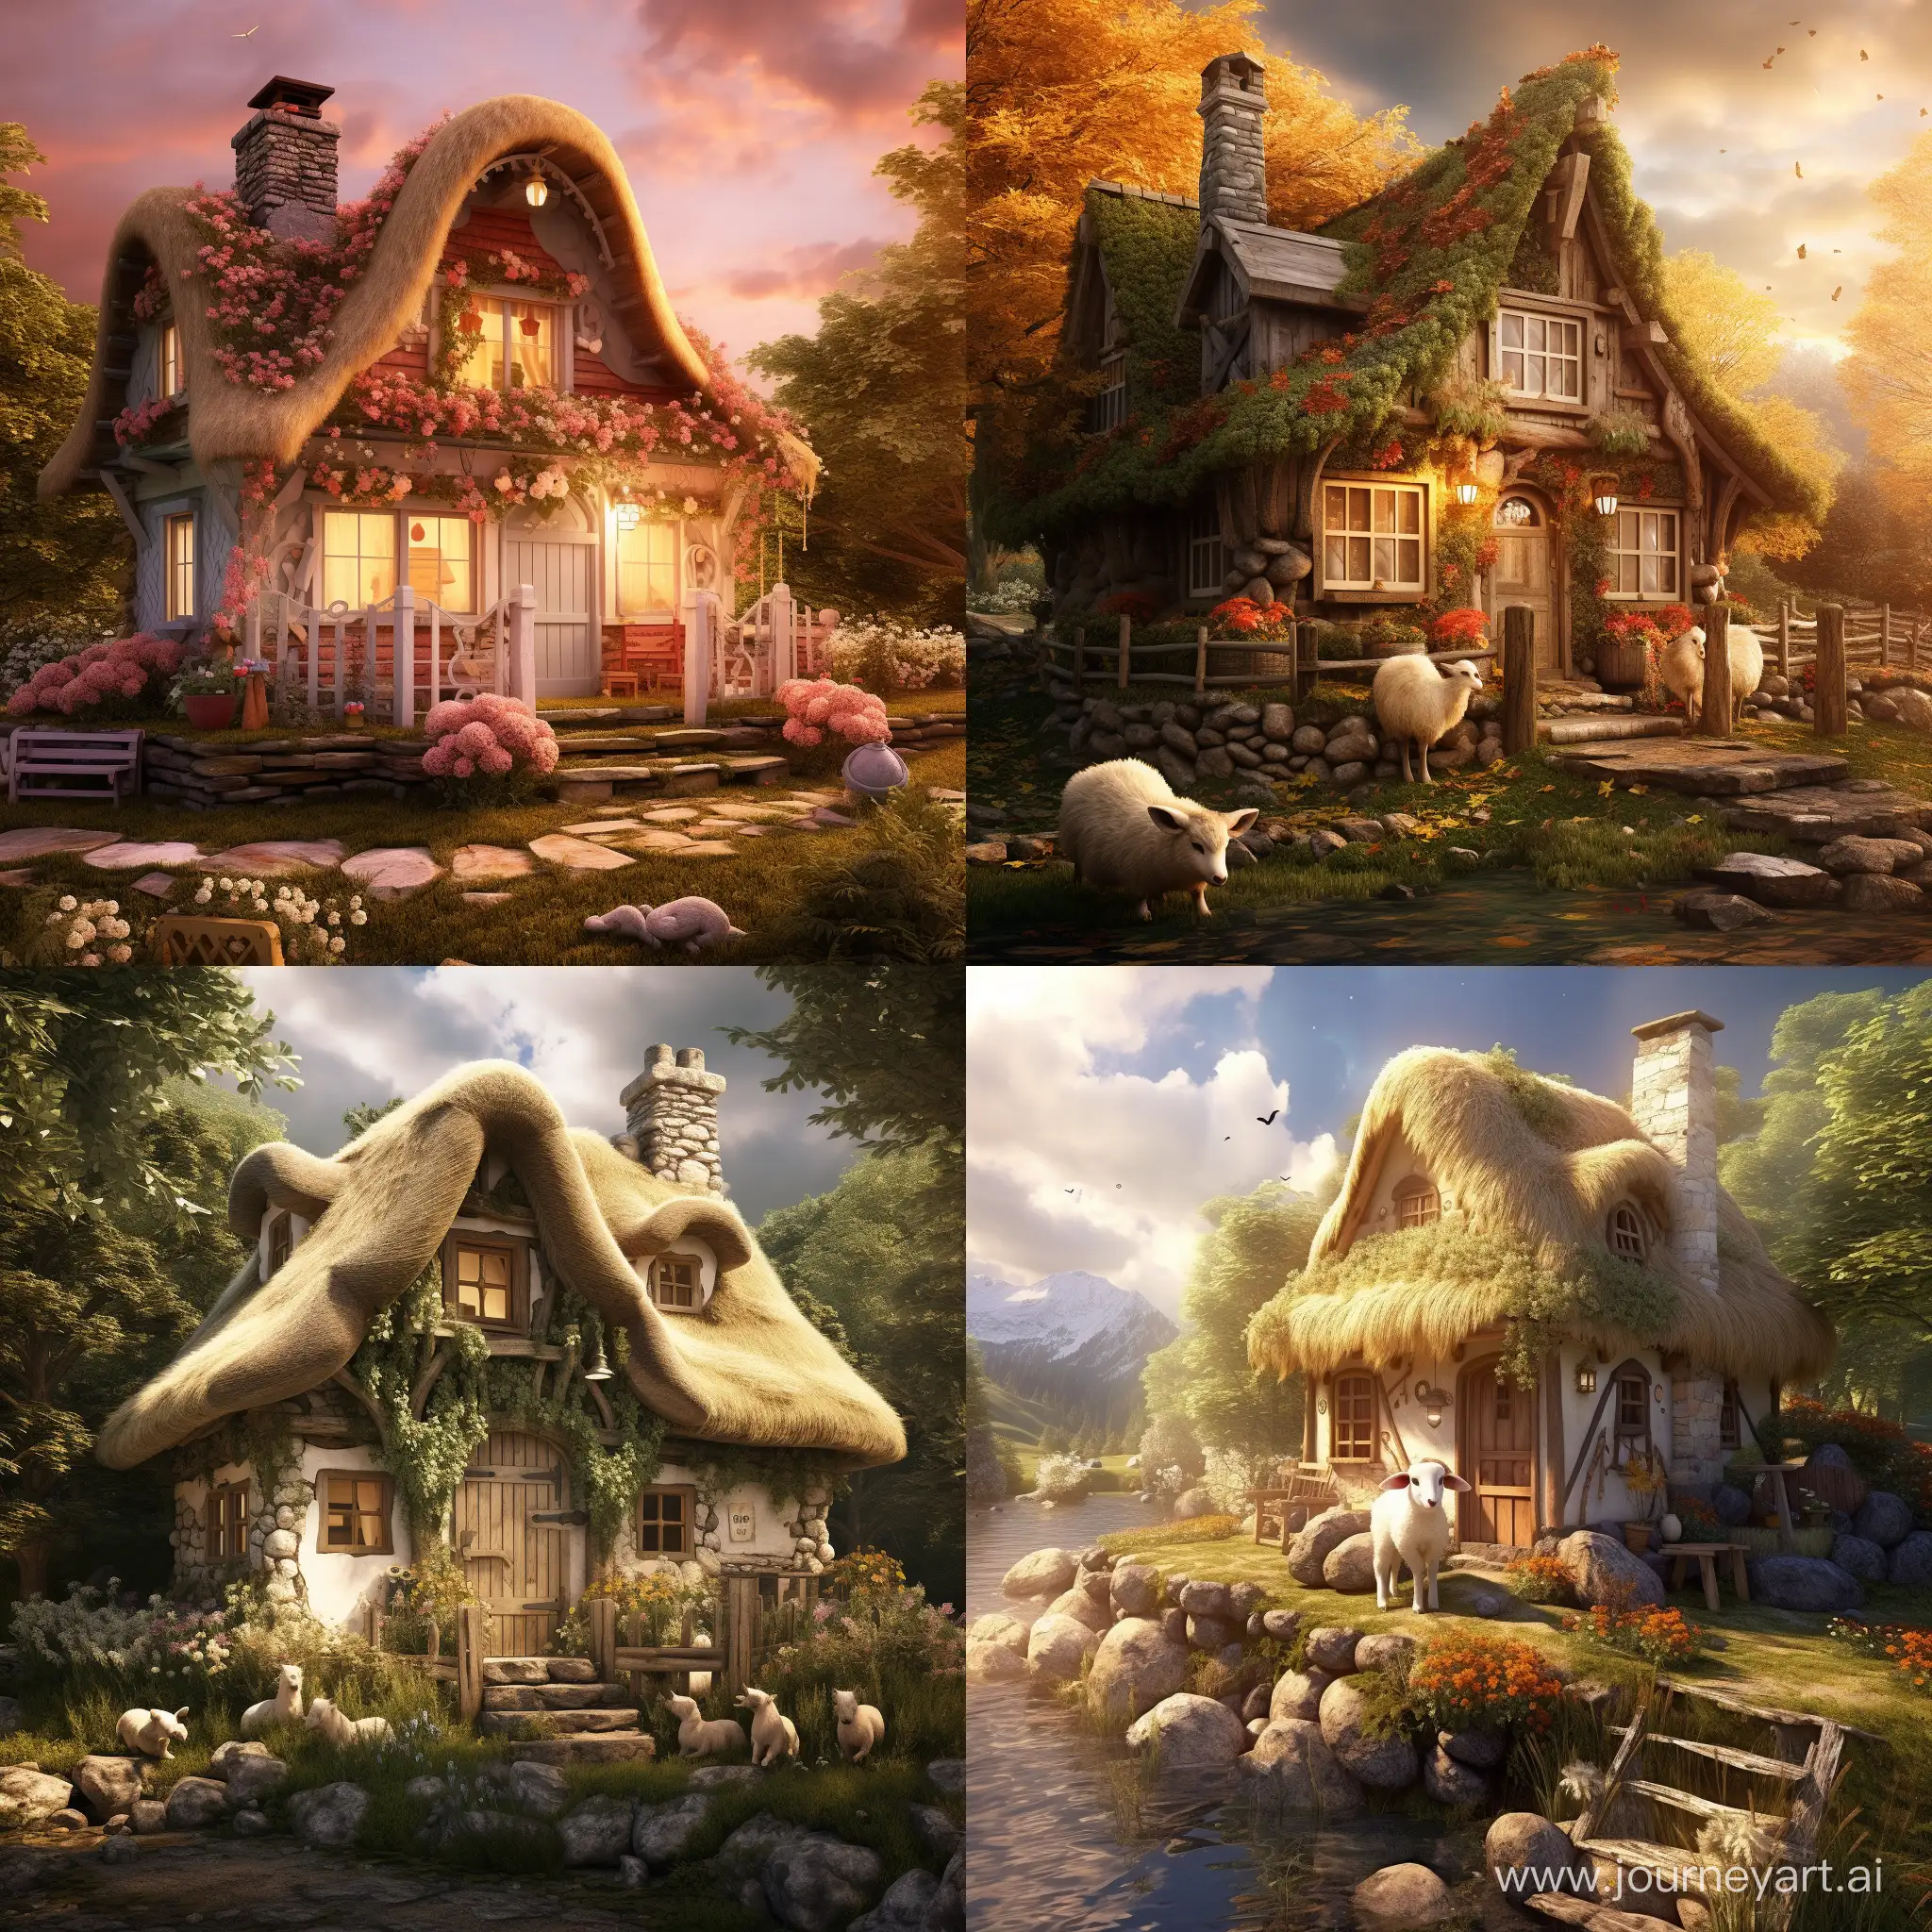 make a cottage for an aries- someone Adventurous and energetic, Pioneering and courageous, Enthusiastic and confident, Dynamic and quick-witted but also Impulsive and impatient
